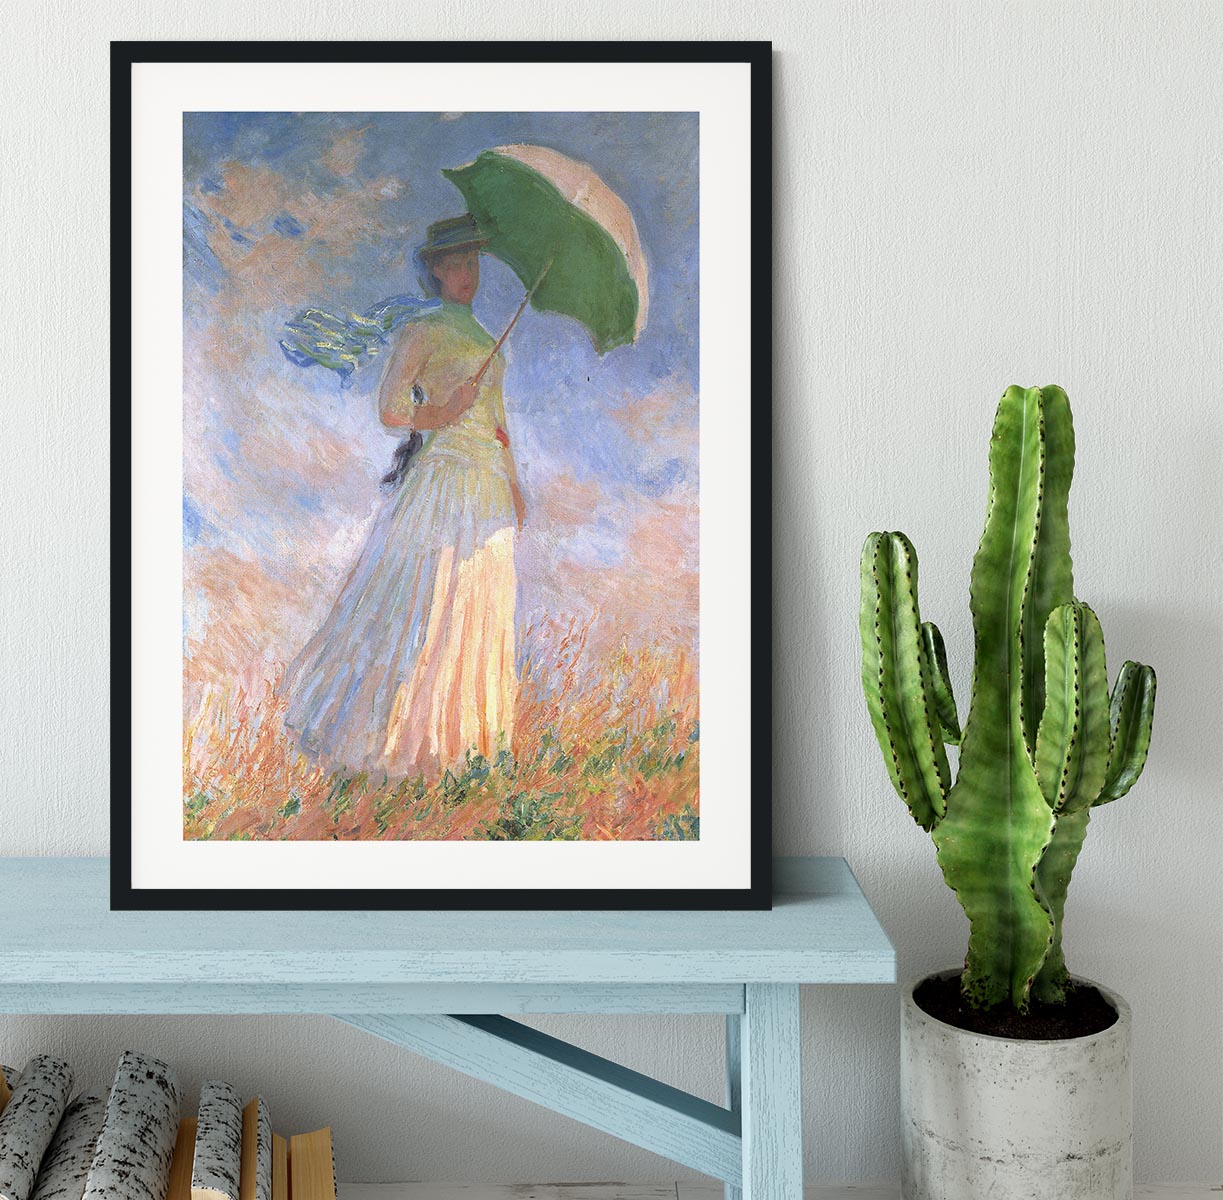 Woman with Parasol 2 by Monet Framed Print - Canvas Art Rocks - 1